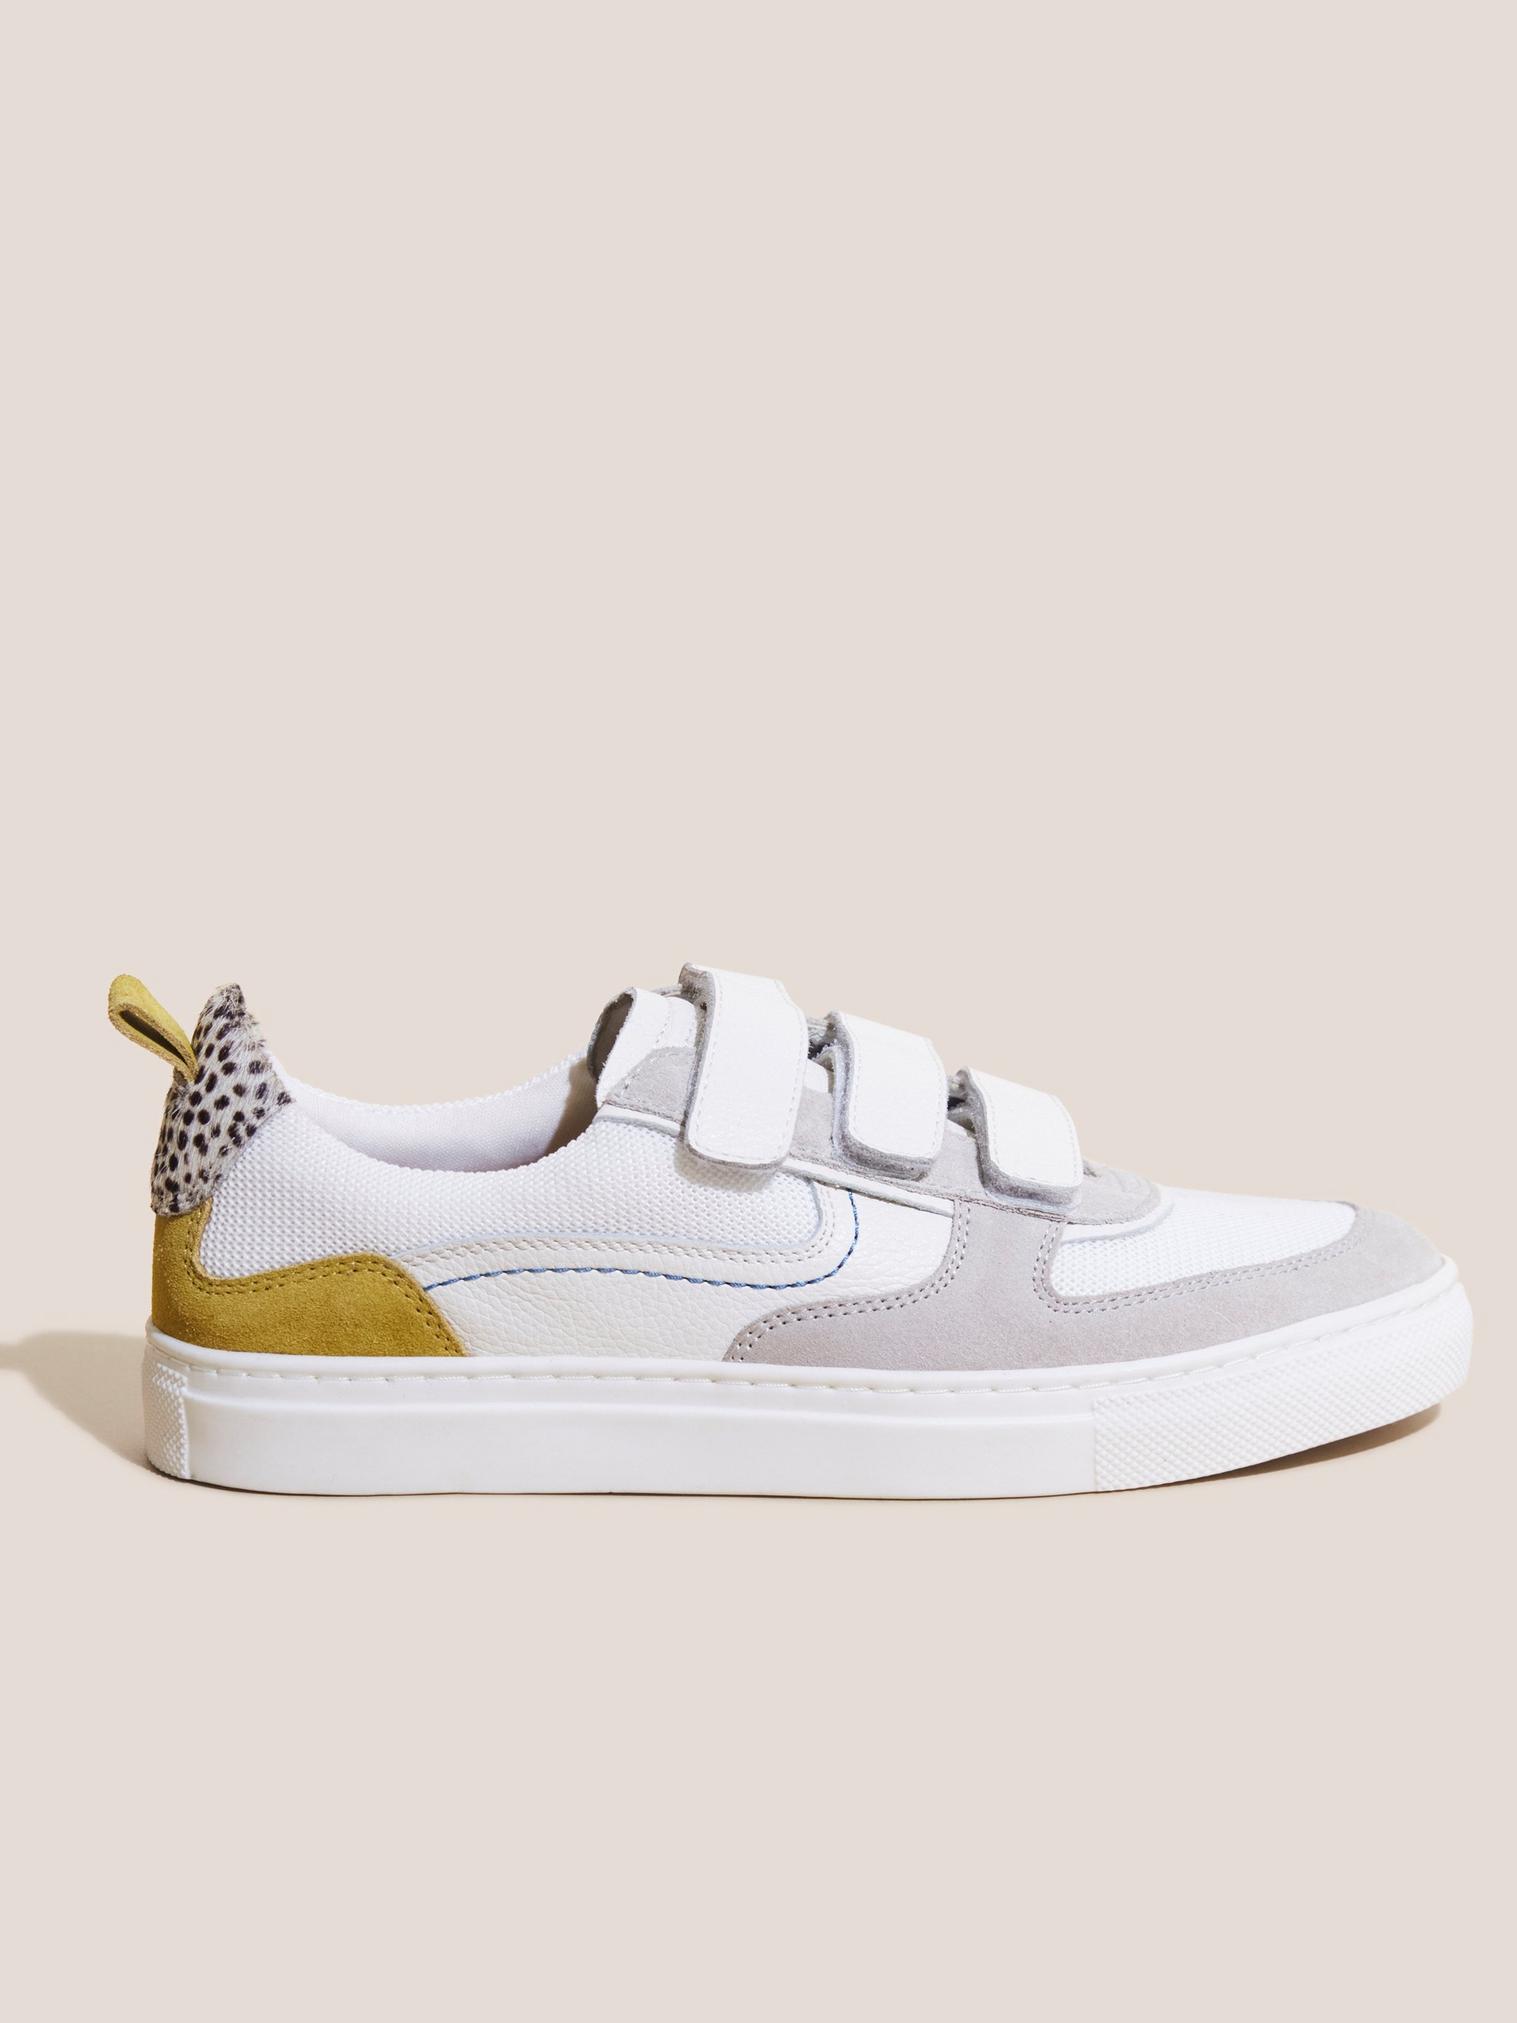 Tabitha Velcro Leather Trainer in WHITE MLT - MODEL FRONT